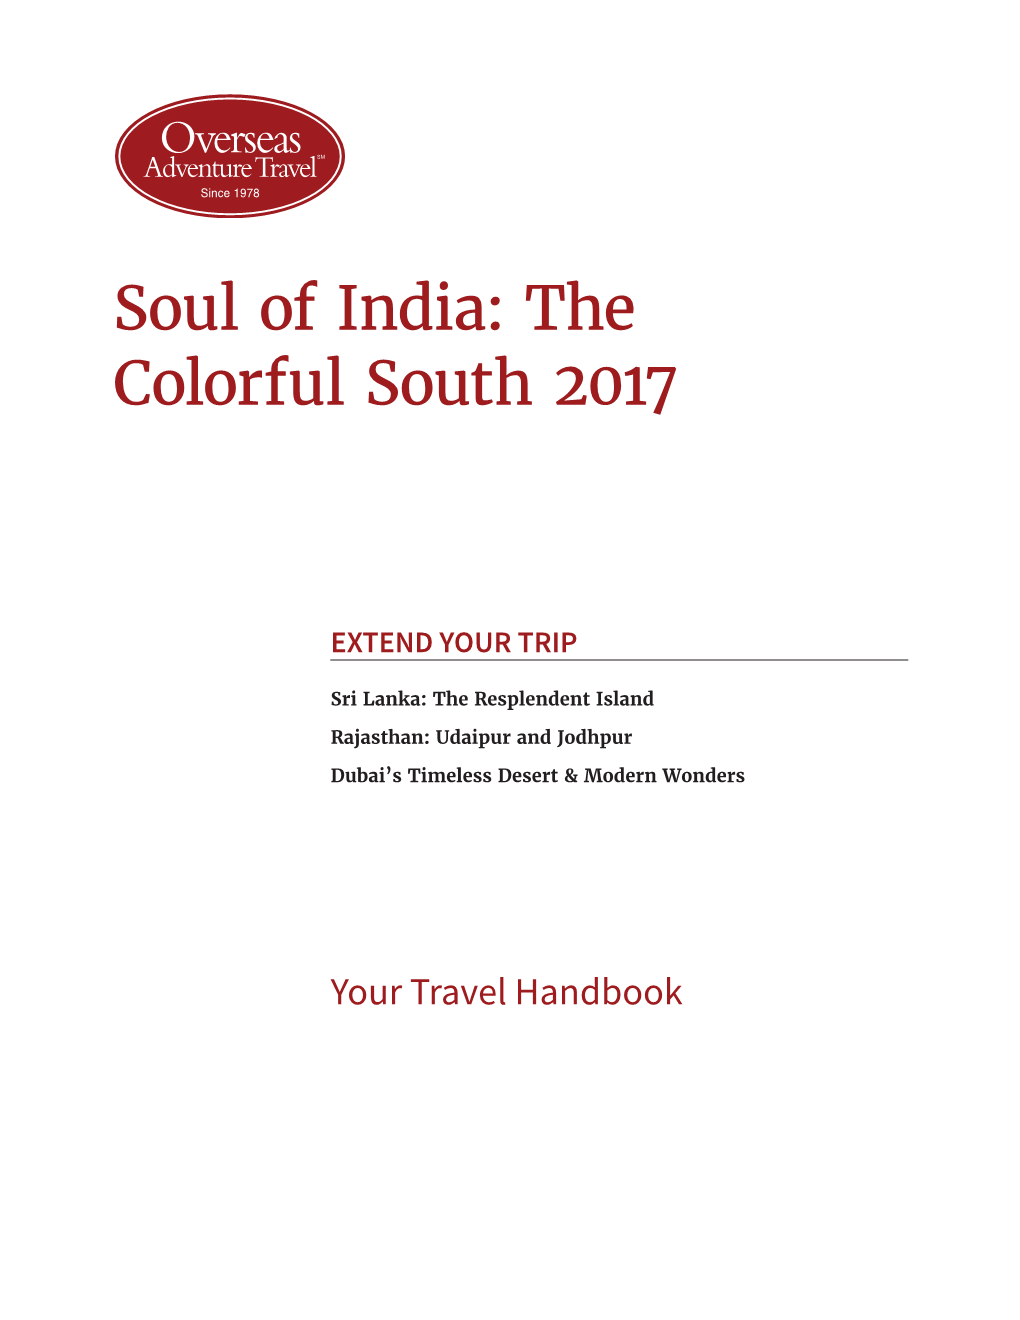 Soul of India: the Colorful South 2017